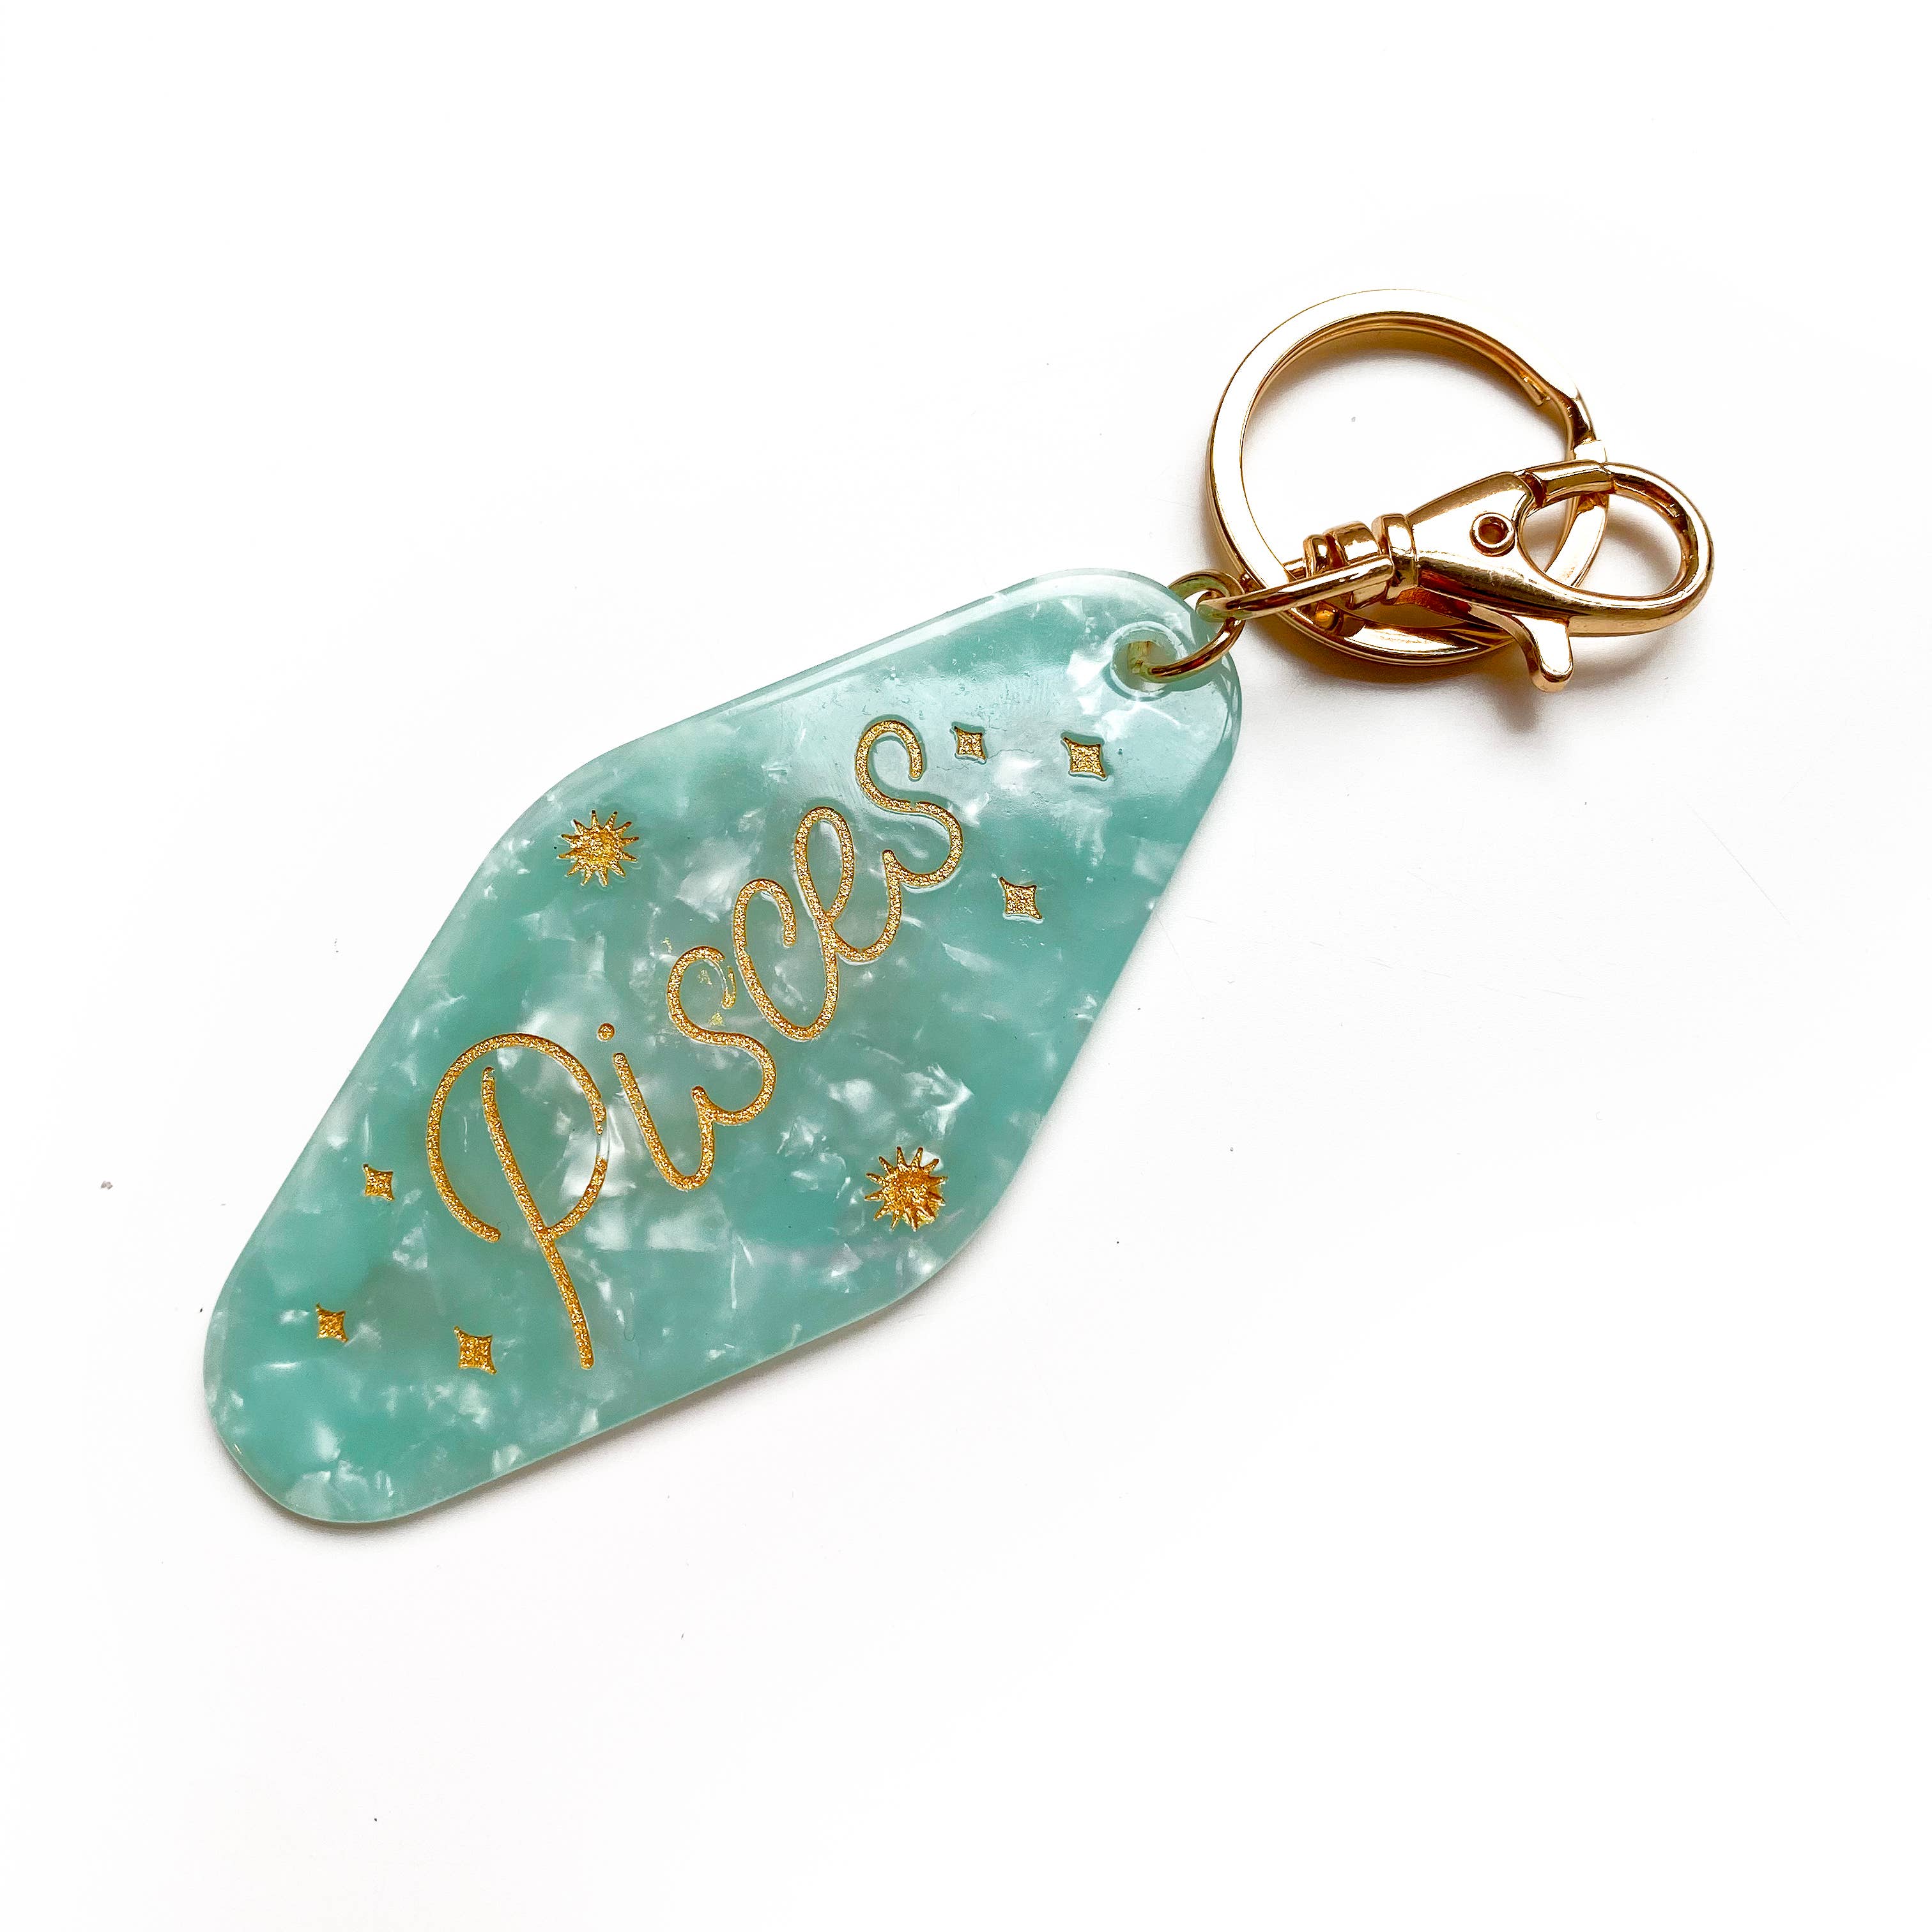 Have A Nice Day - Pisces Horoscope Motel Keychain